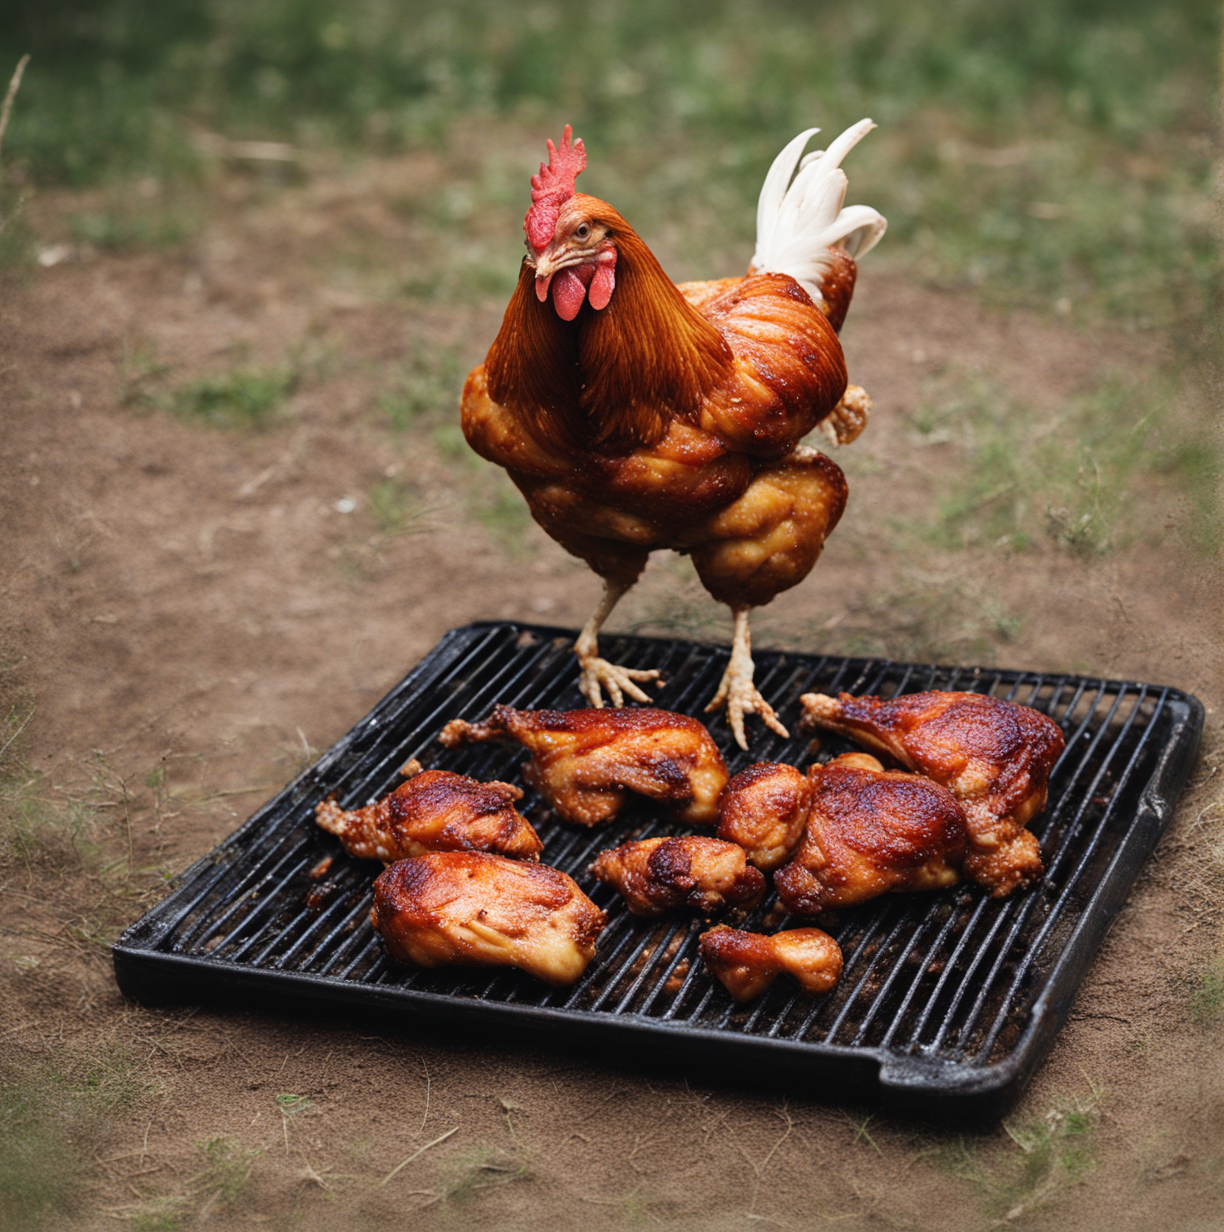 can chickens eat bbq chicken